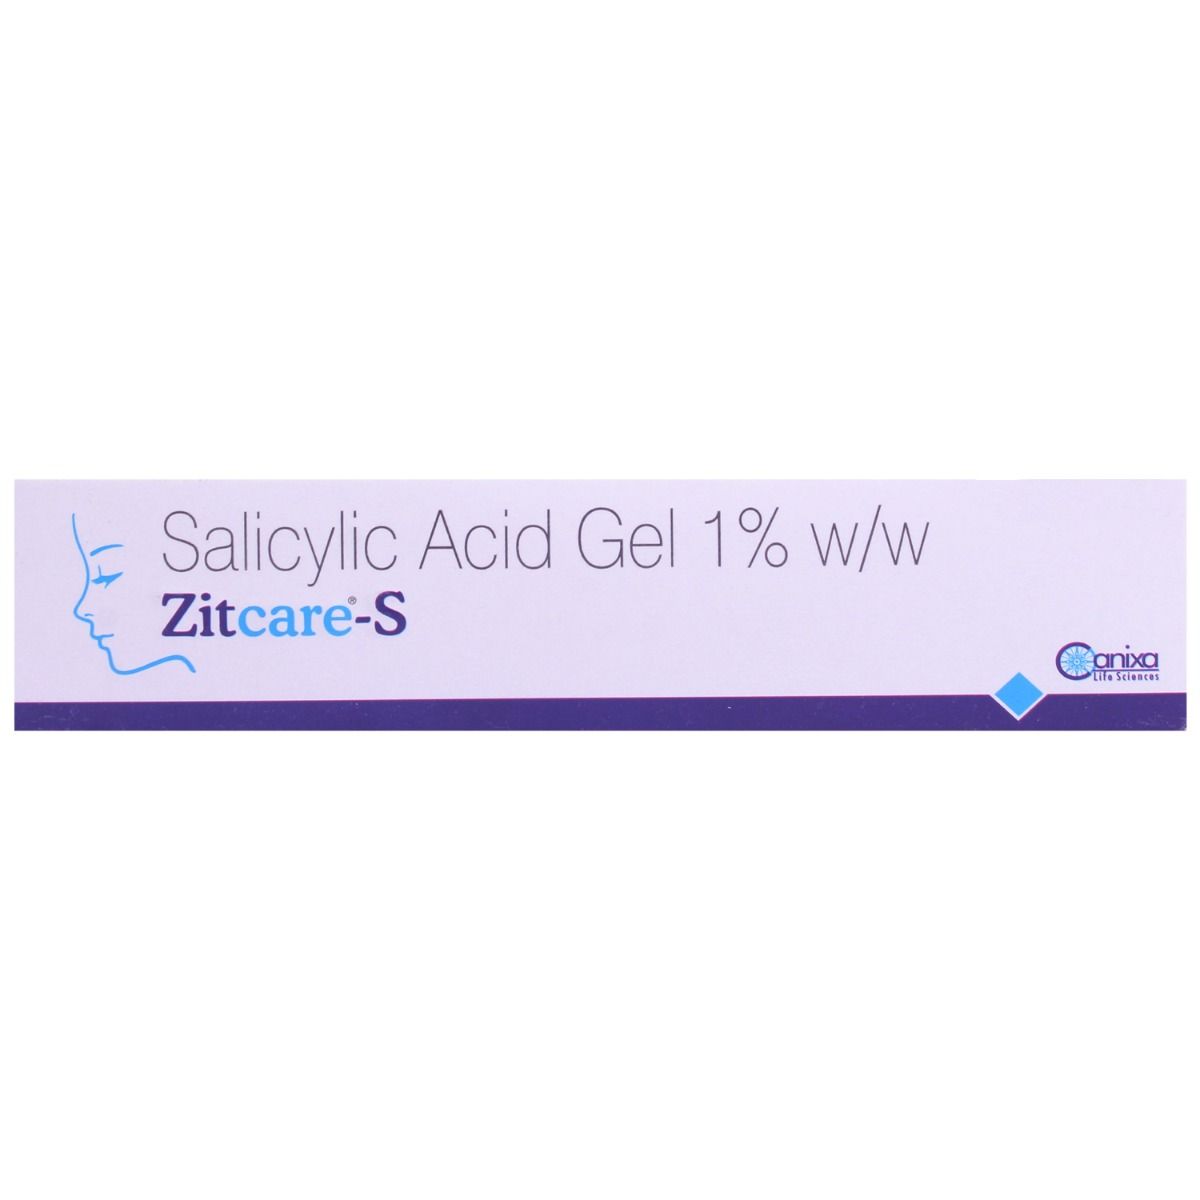 Zitcare S Gel 20 gm Price, Uses, Side Effects, Composition ...